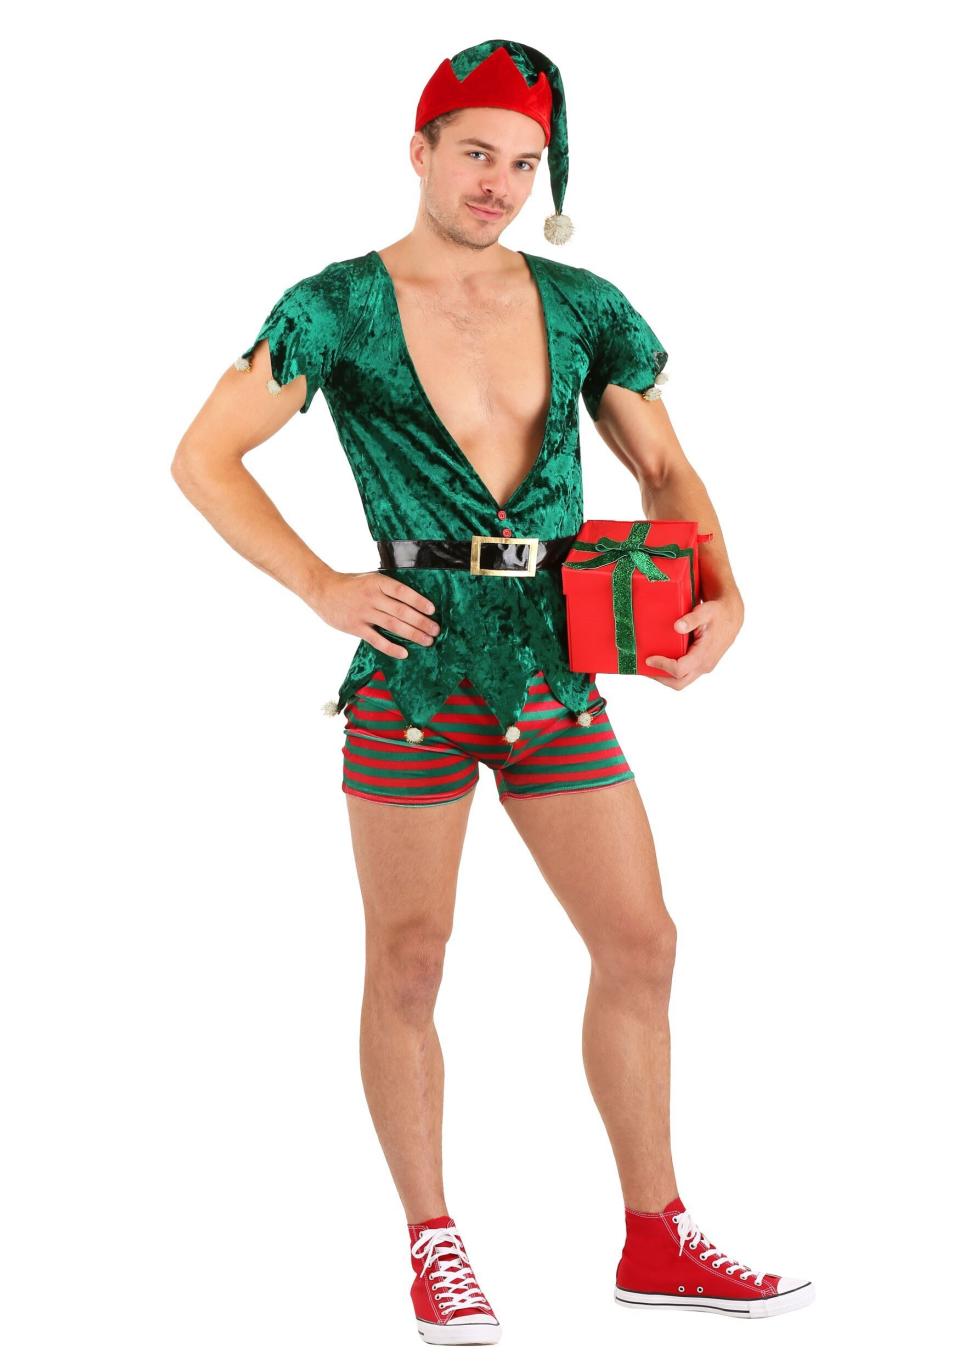 If you're one of those people who fantasize about the romantic goings-on in Santa's workshop, this &lt;a href=&quot;https://www.halloweencostumes.com/mens-sexy-christmas-elf-costume.html&quot; target=&quot;_blank&quot; rel=&quot;noopener noreferrer&quot;&gt;sexy elf costume&lt;/a&gt; is perfect for role playing.